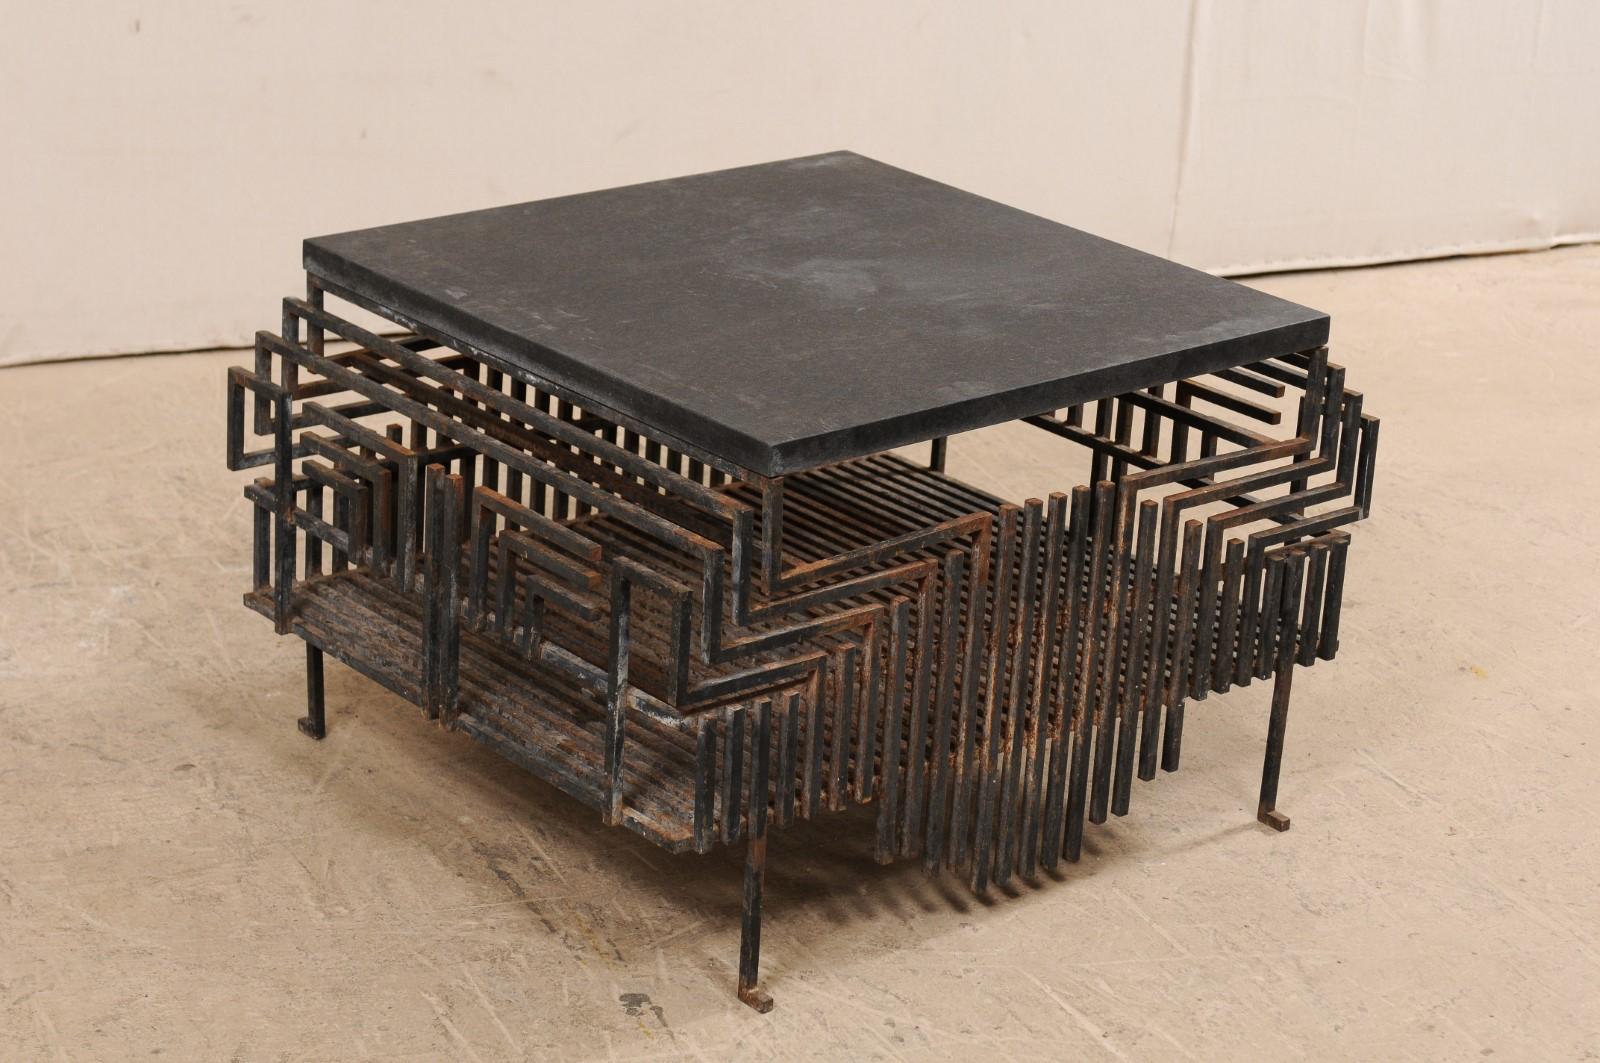 French, Early 20th Century Iron Fireplace Grate Coffee Table with Granite Top 3